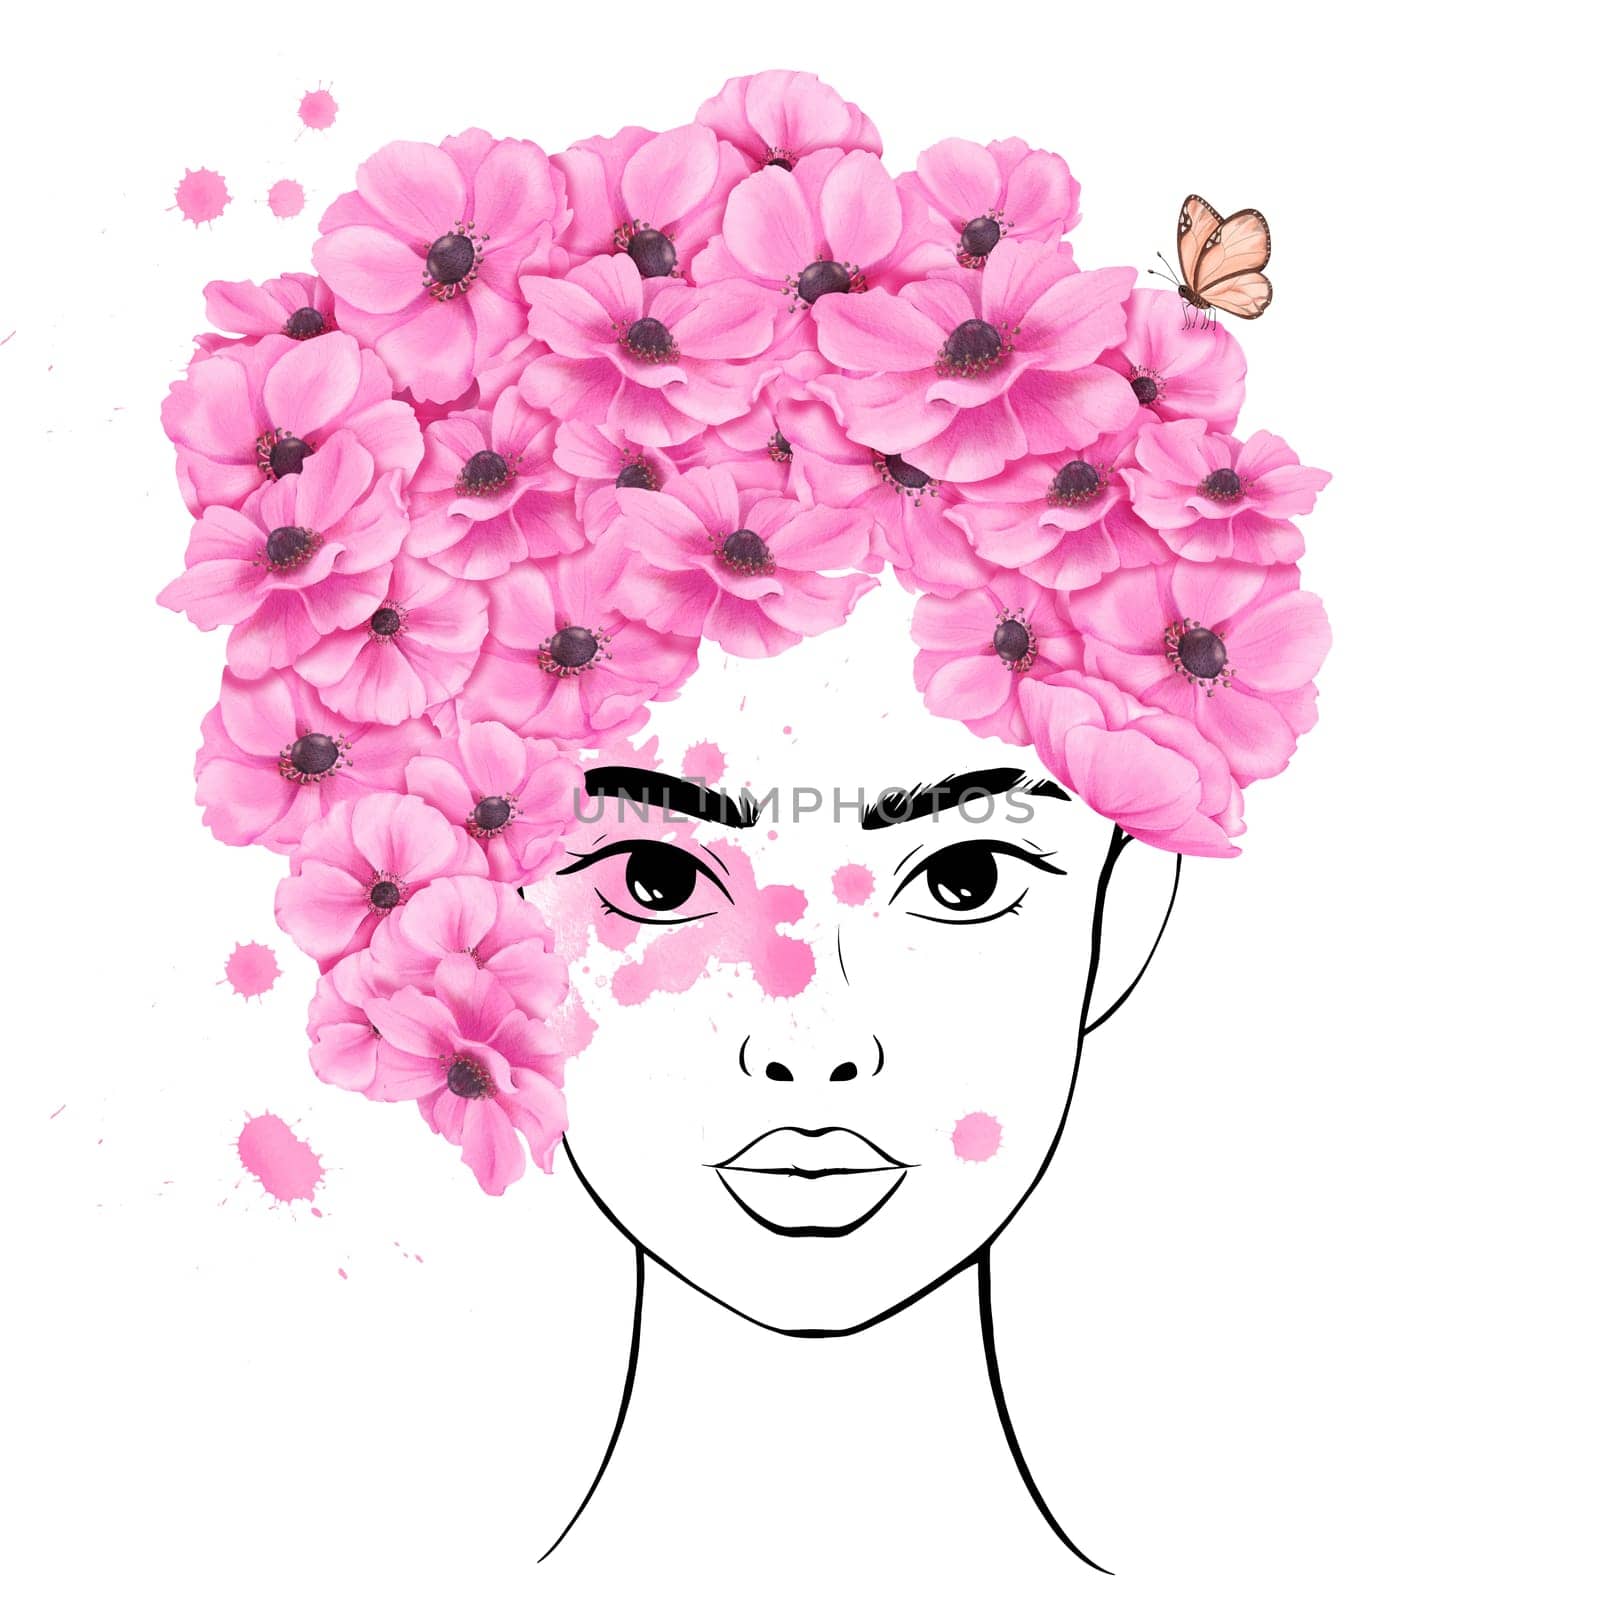 watercolor illustration. a linear portrait of a stunning young woman. Her hair with pink anemone flowers and butterfly. vibrant splashes of watercolor, symbol brightness and inspiration. avatar by Art_Mari_Ka